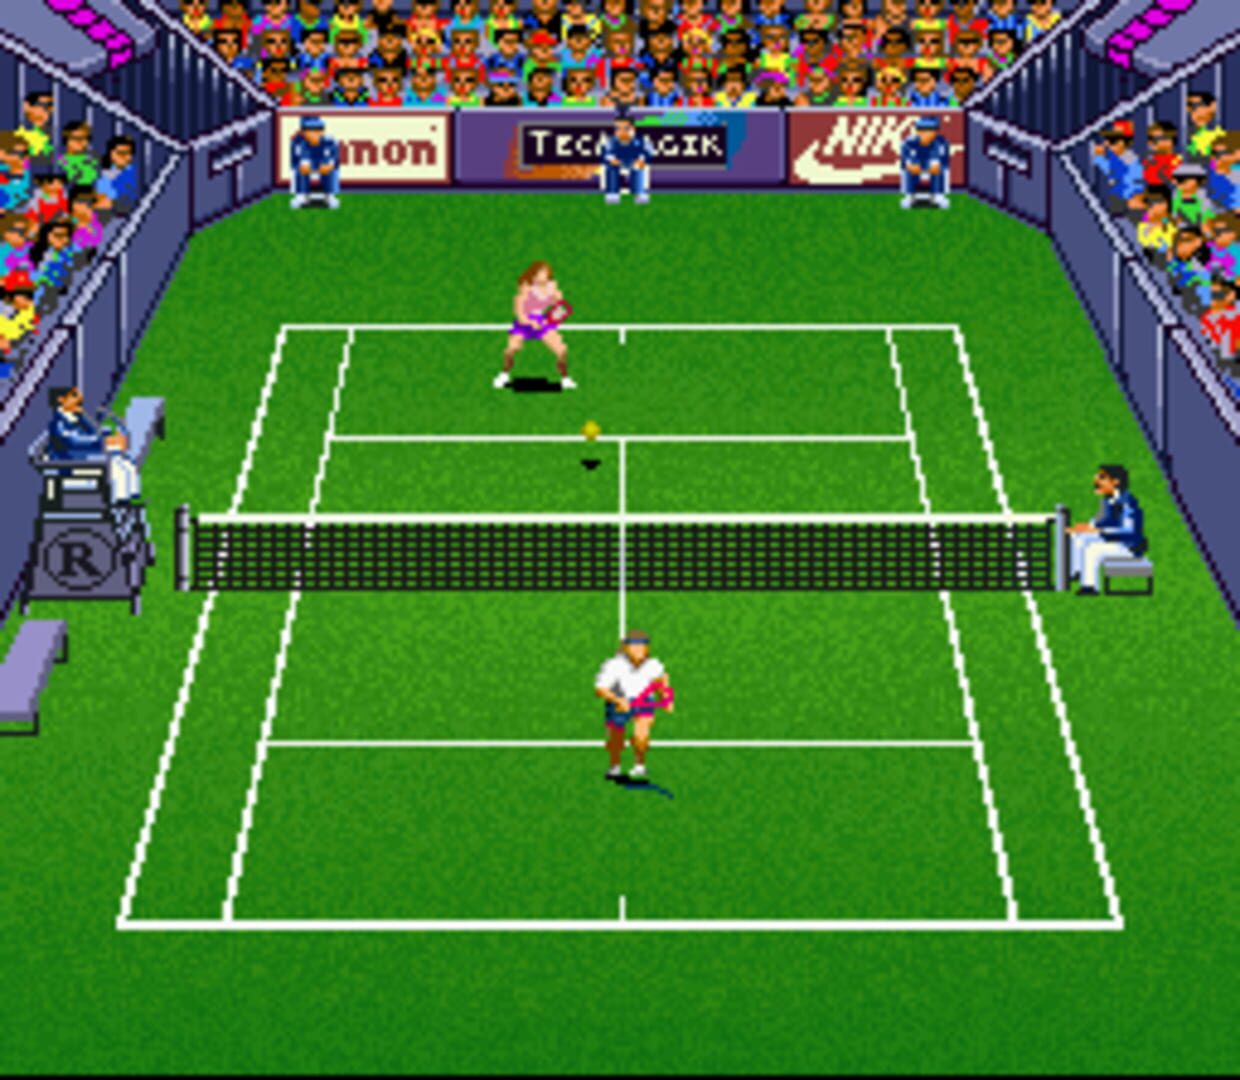 Андре играм. Andre Agassi Tennis Snes. Super Tennis Snes. Andre Agassi Tennis Snes обложка. Agassi Tennis Generation GBA Cover.